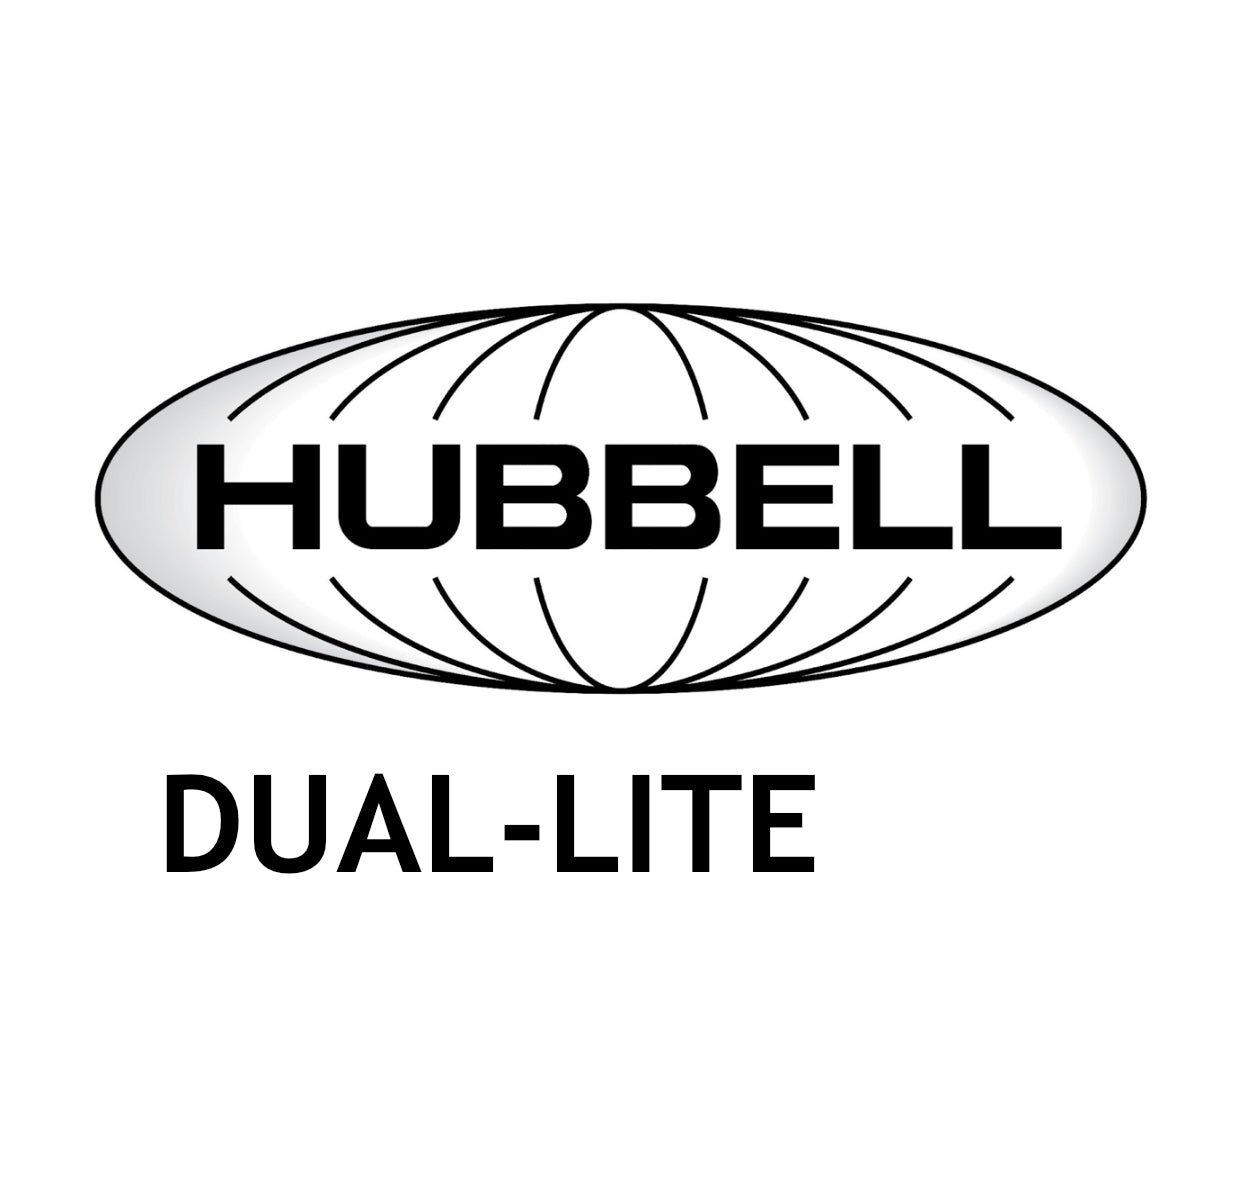 HUBBELL DUAL-LITE